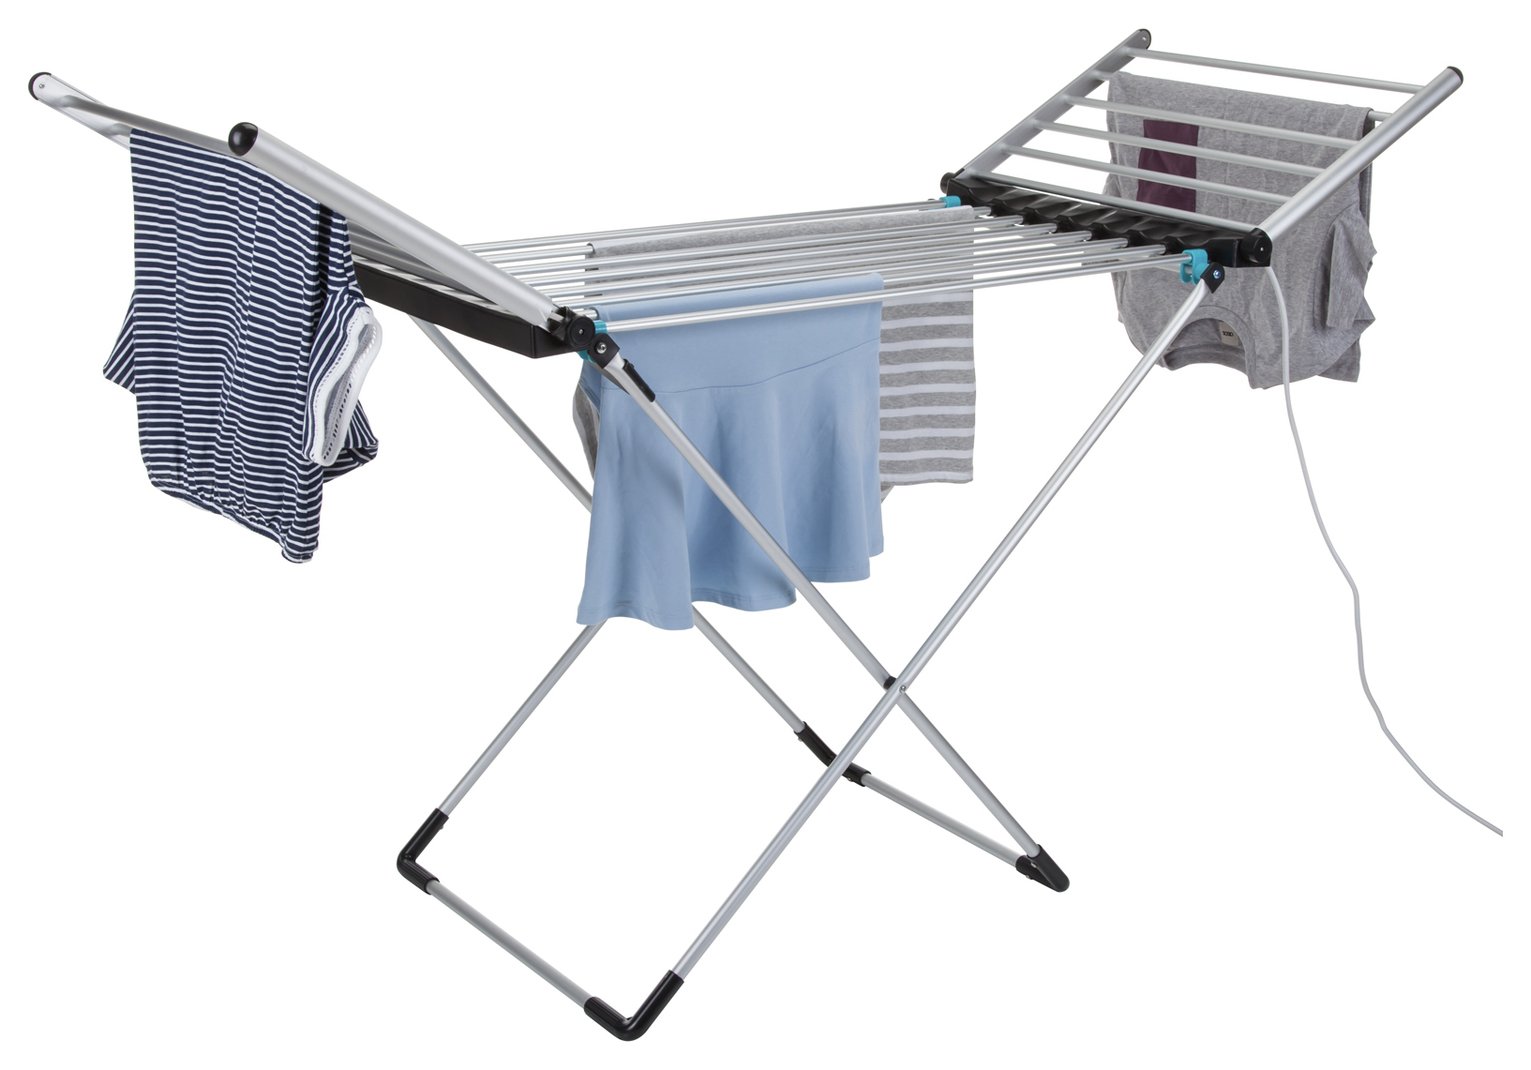 Minky Wing 12m Heated Clothes Airer with Cover Review